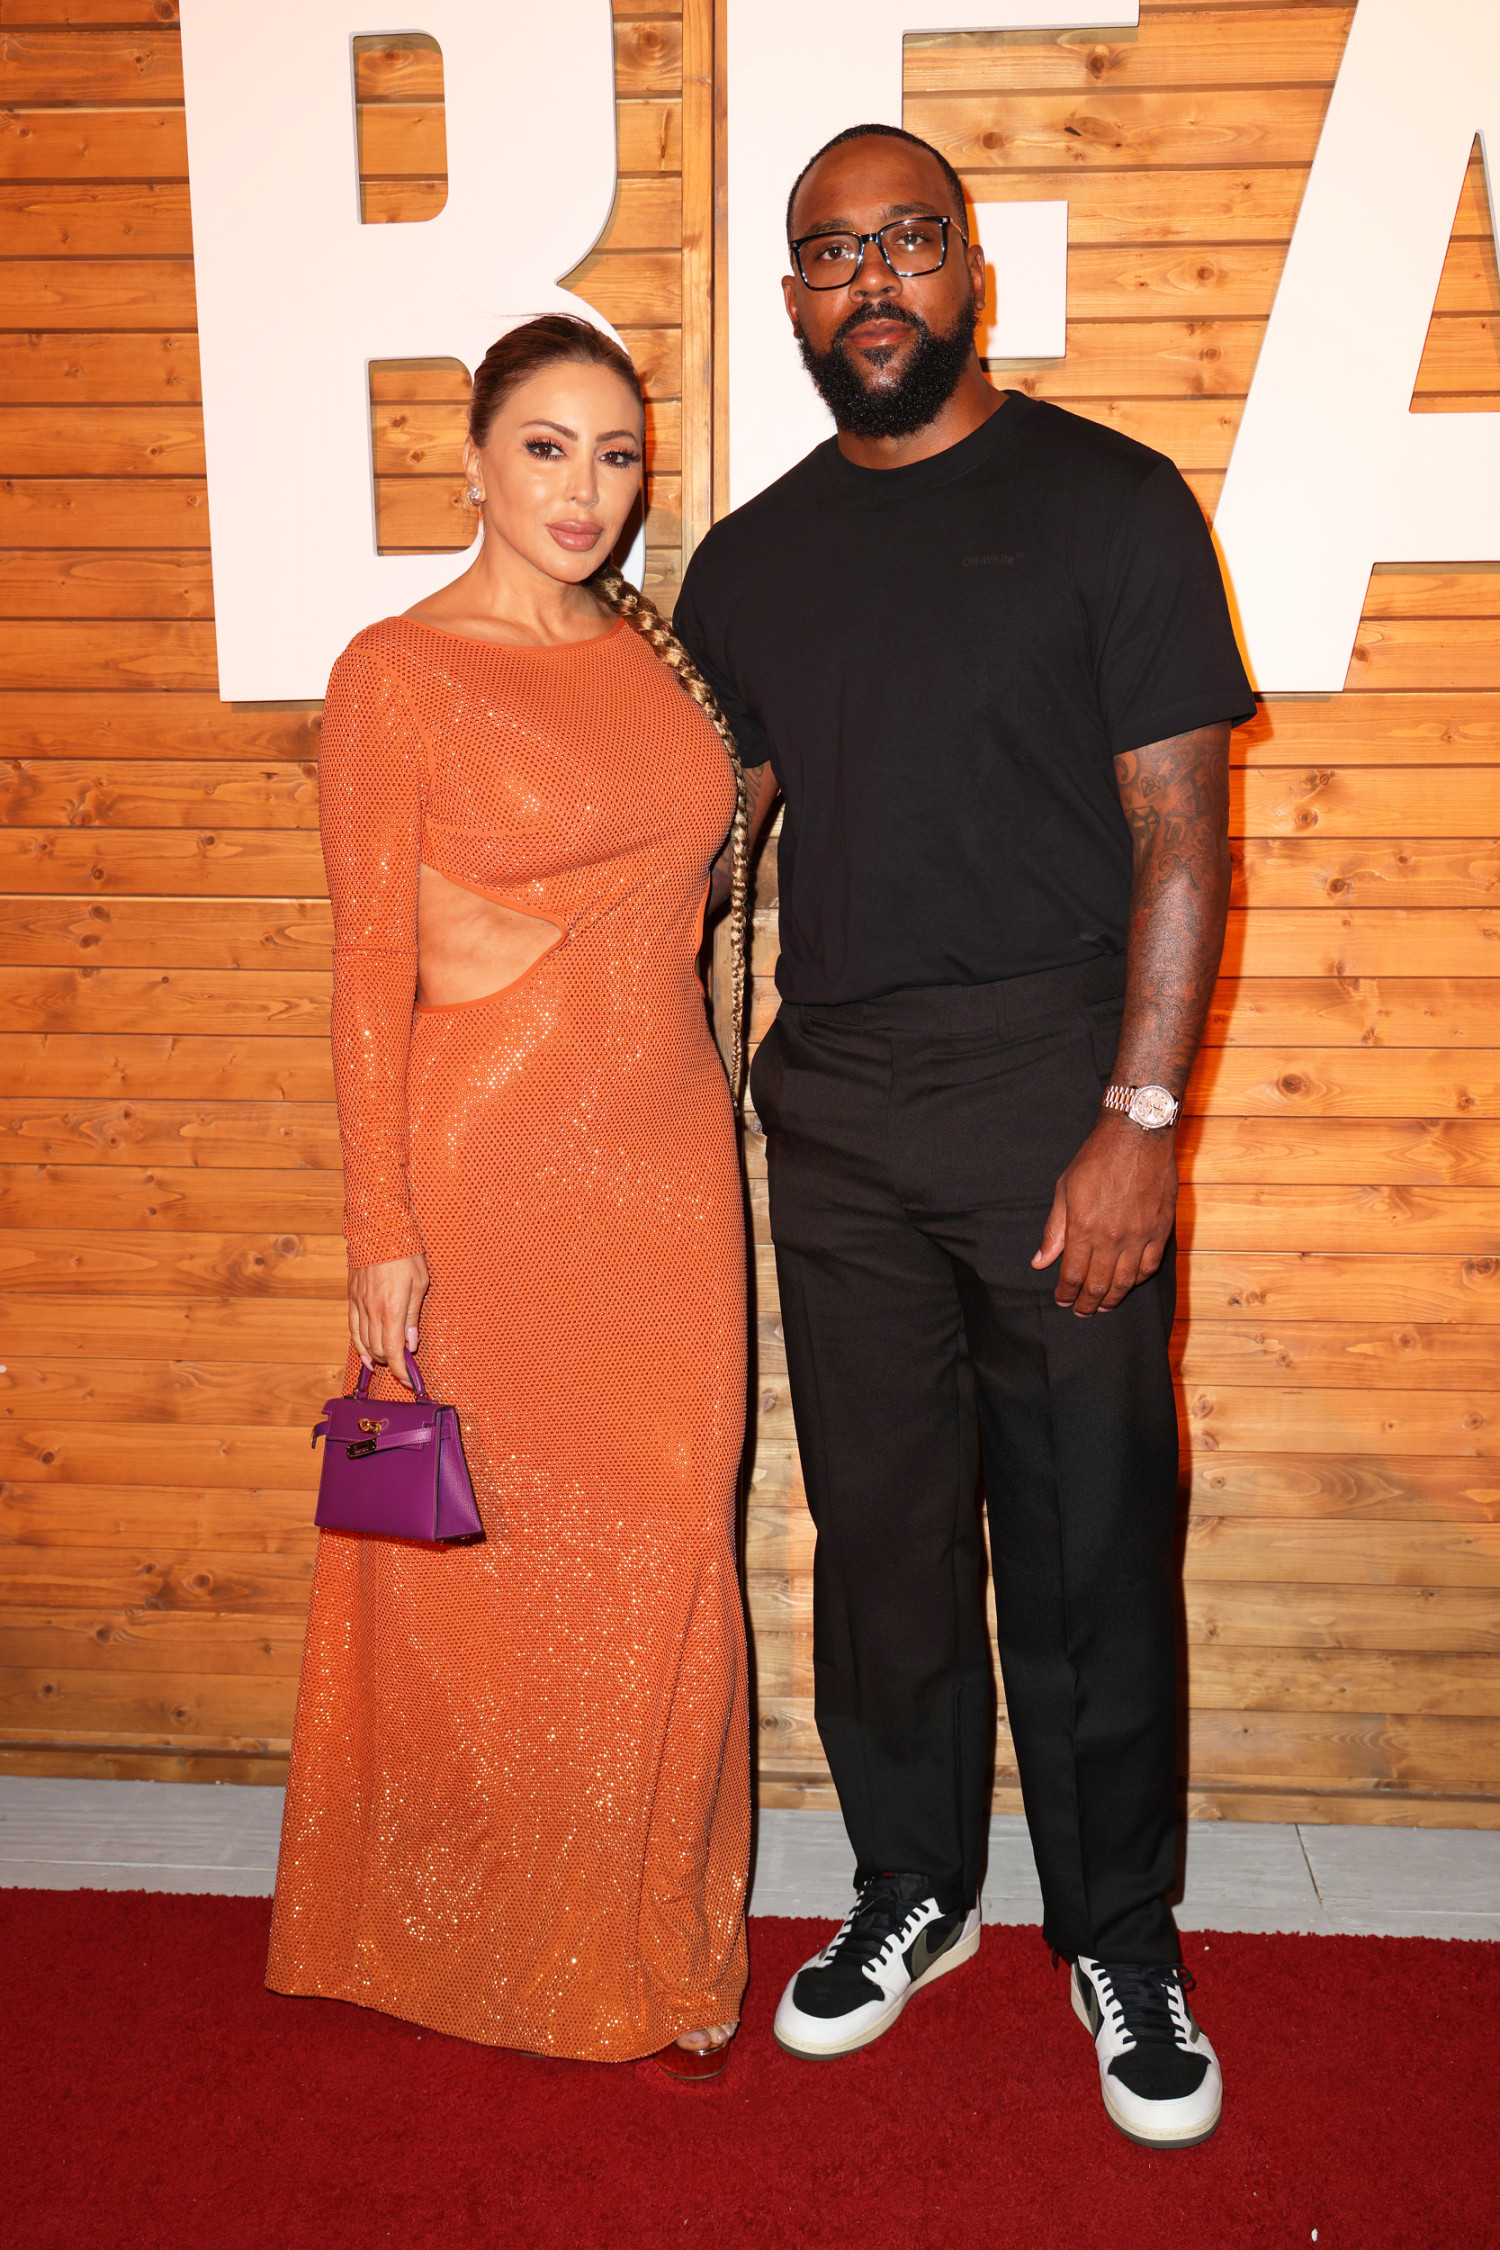 Larsa Pippen And Marcus Jordan Will Host A Celebrity Basketball